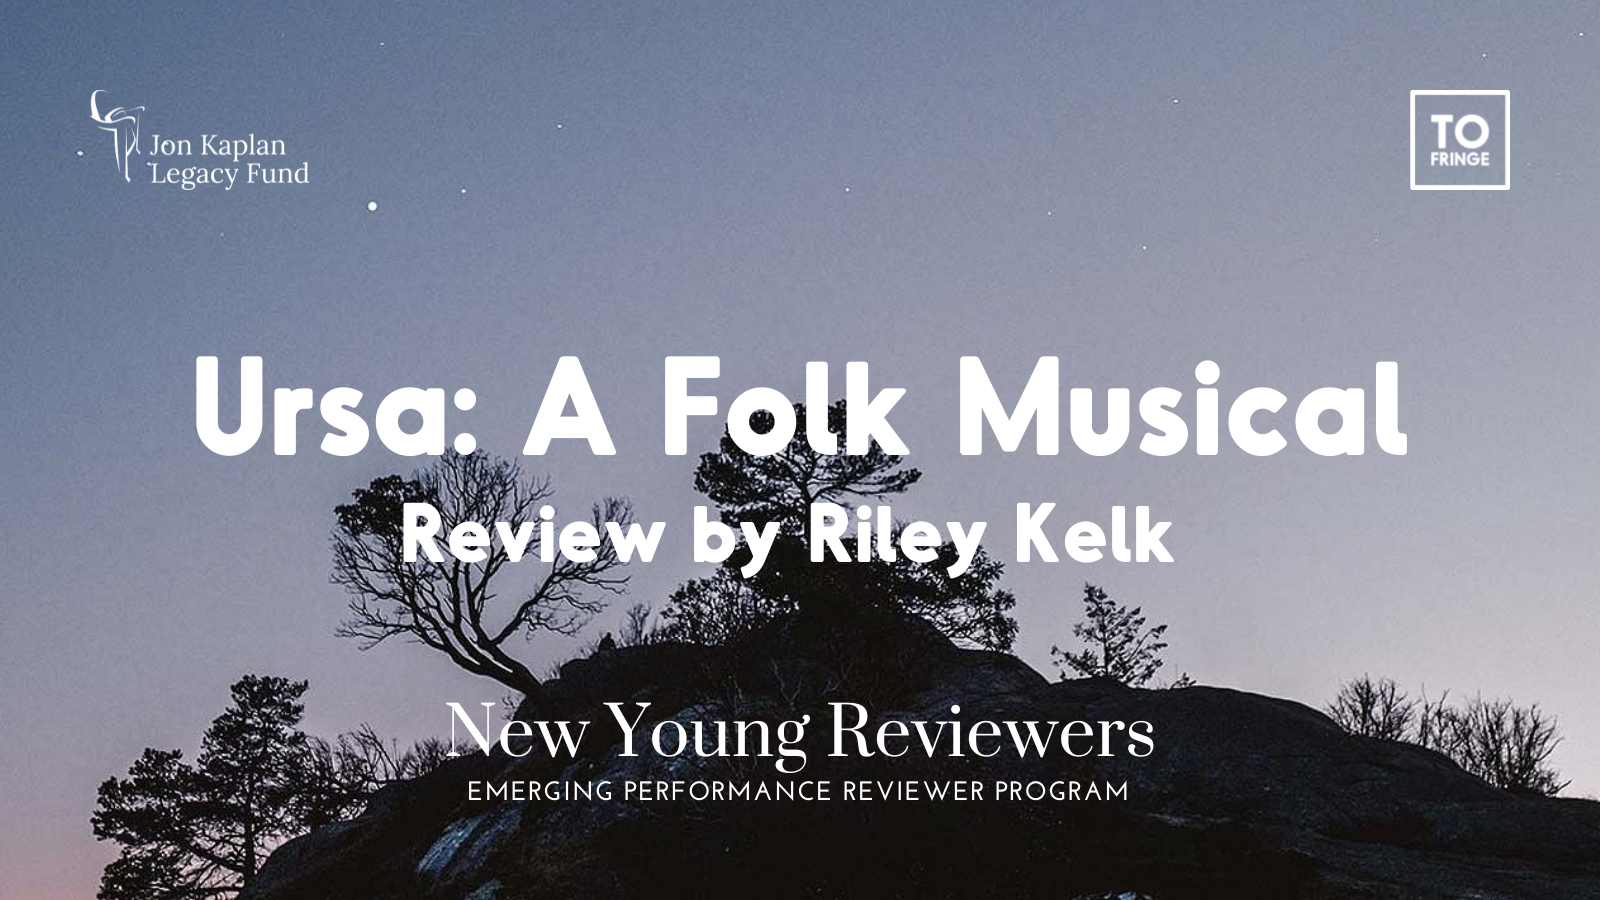 A photo of a hill with small trees and bushes against an early evening sky that reads “Ursa: A Folk Musical. Review by Riley Kelk.” with program logos.